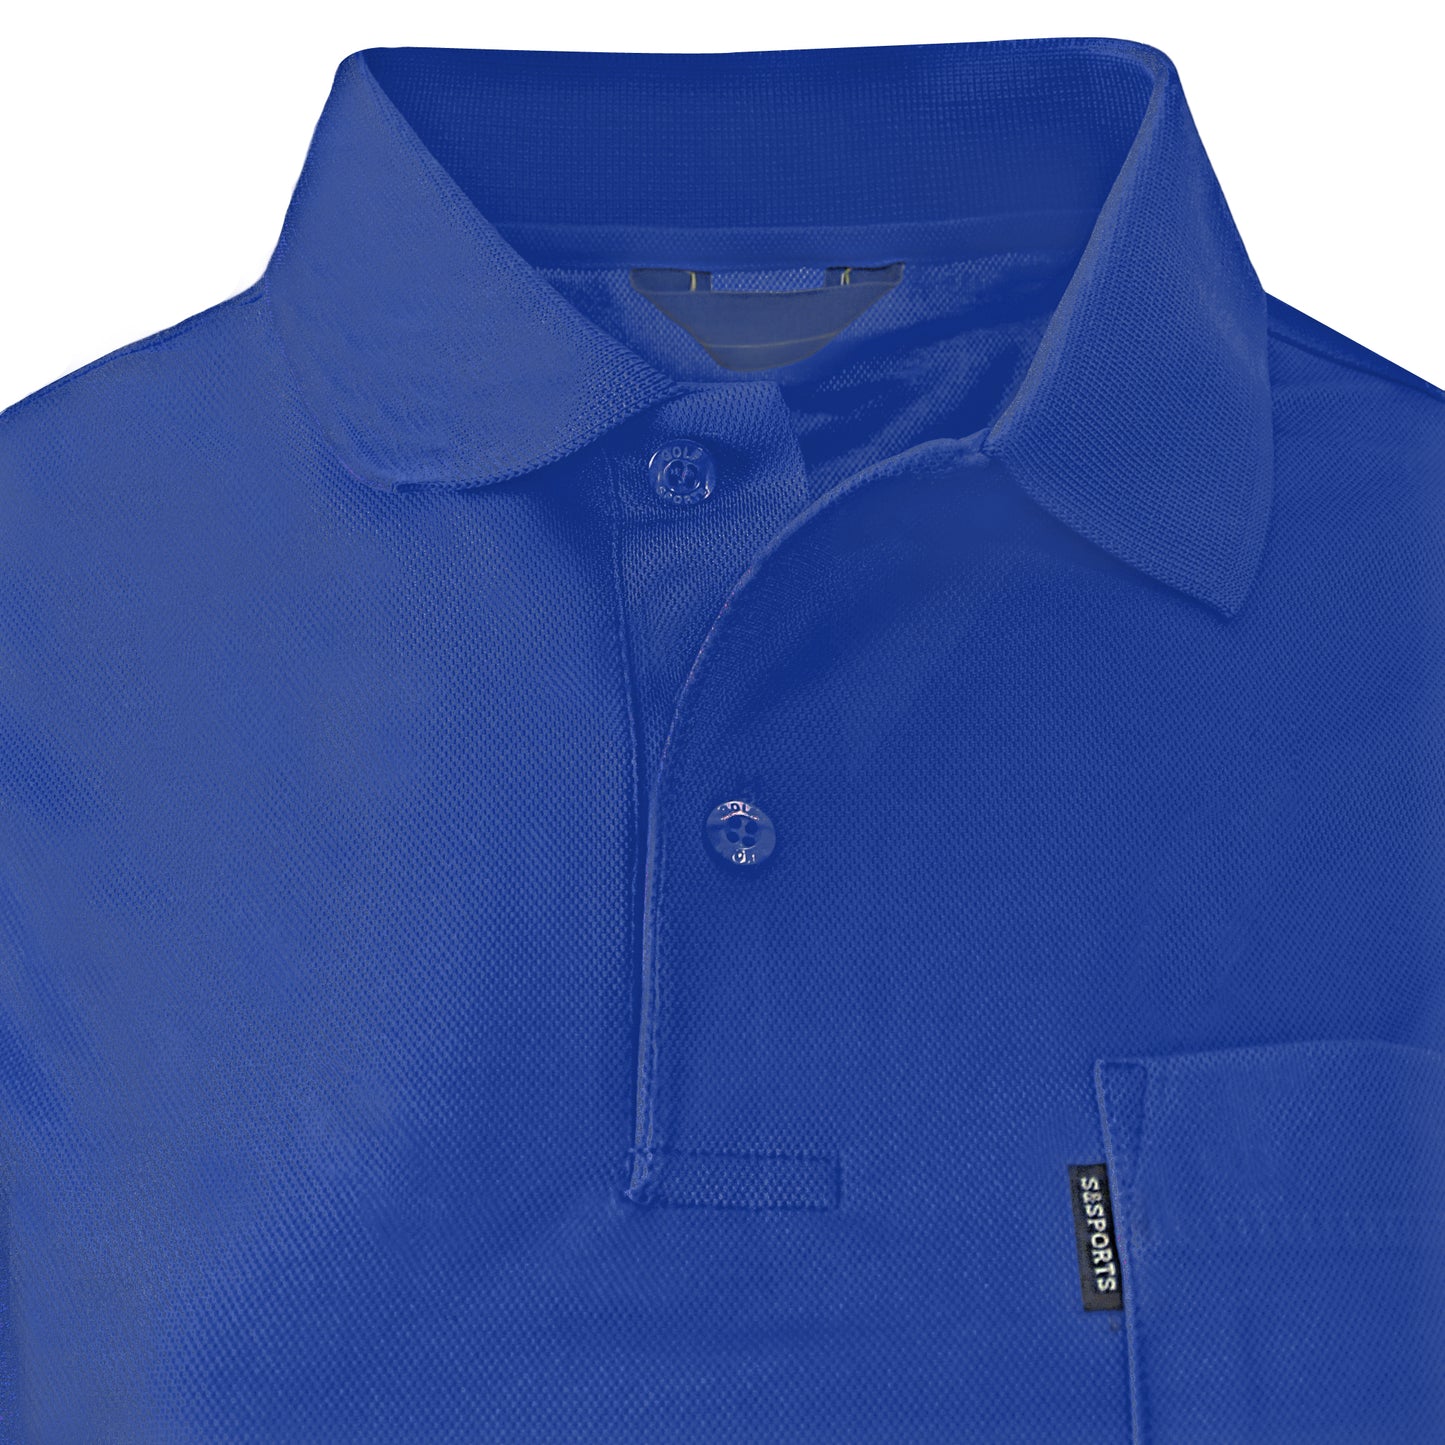 Long Sleeve Dri Cool Solid Button Down Shirts(12colors)